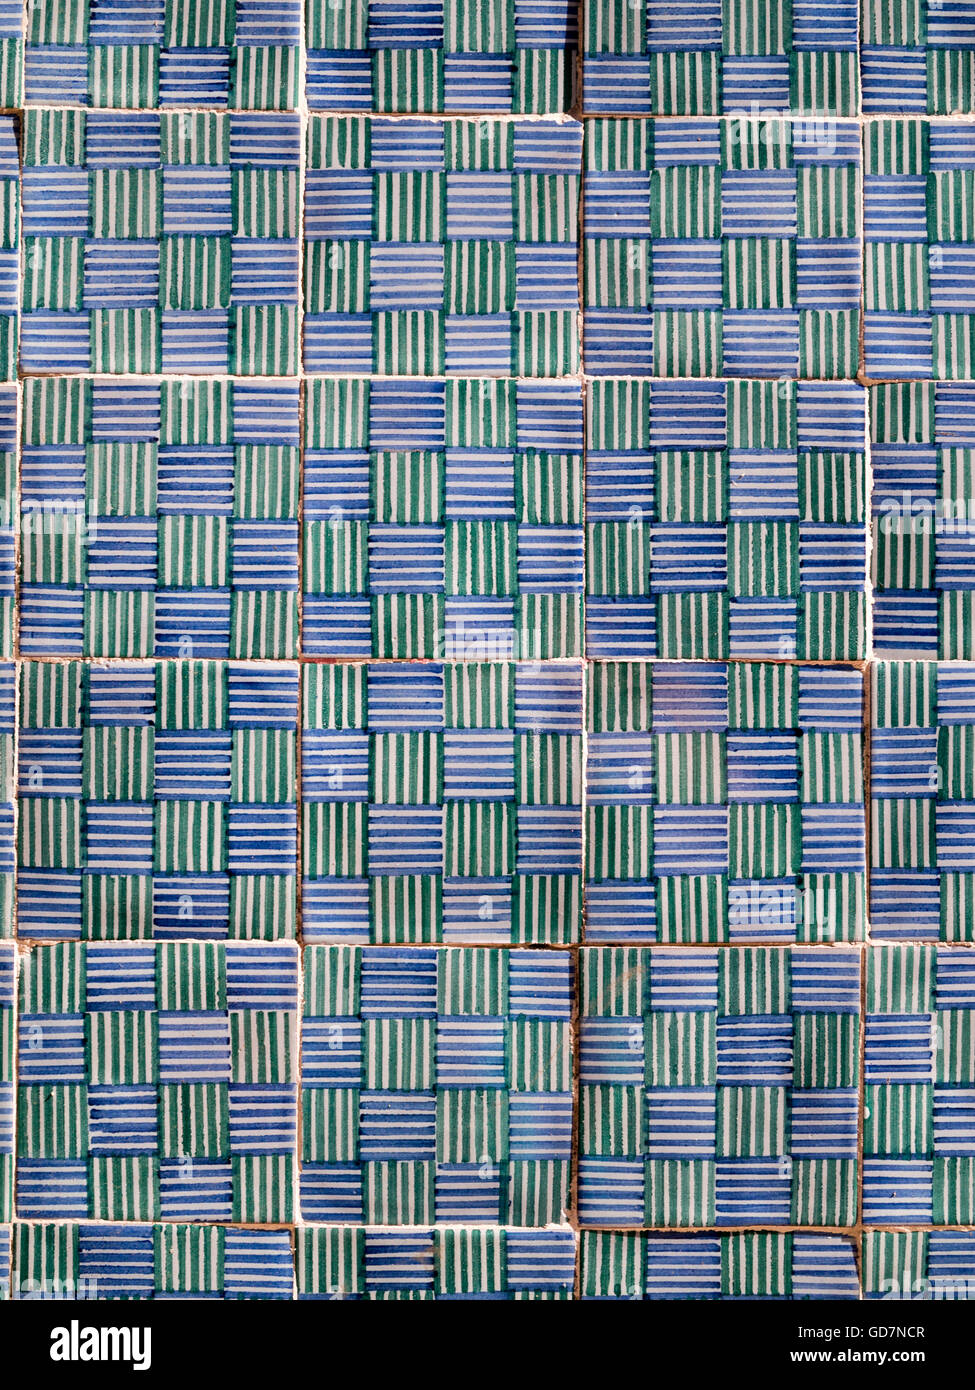 Plaid patterned tiles in blue, green and white Stock Photo